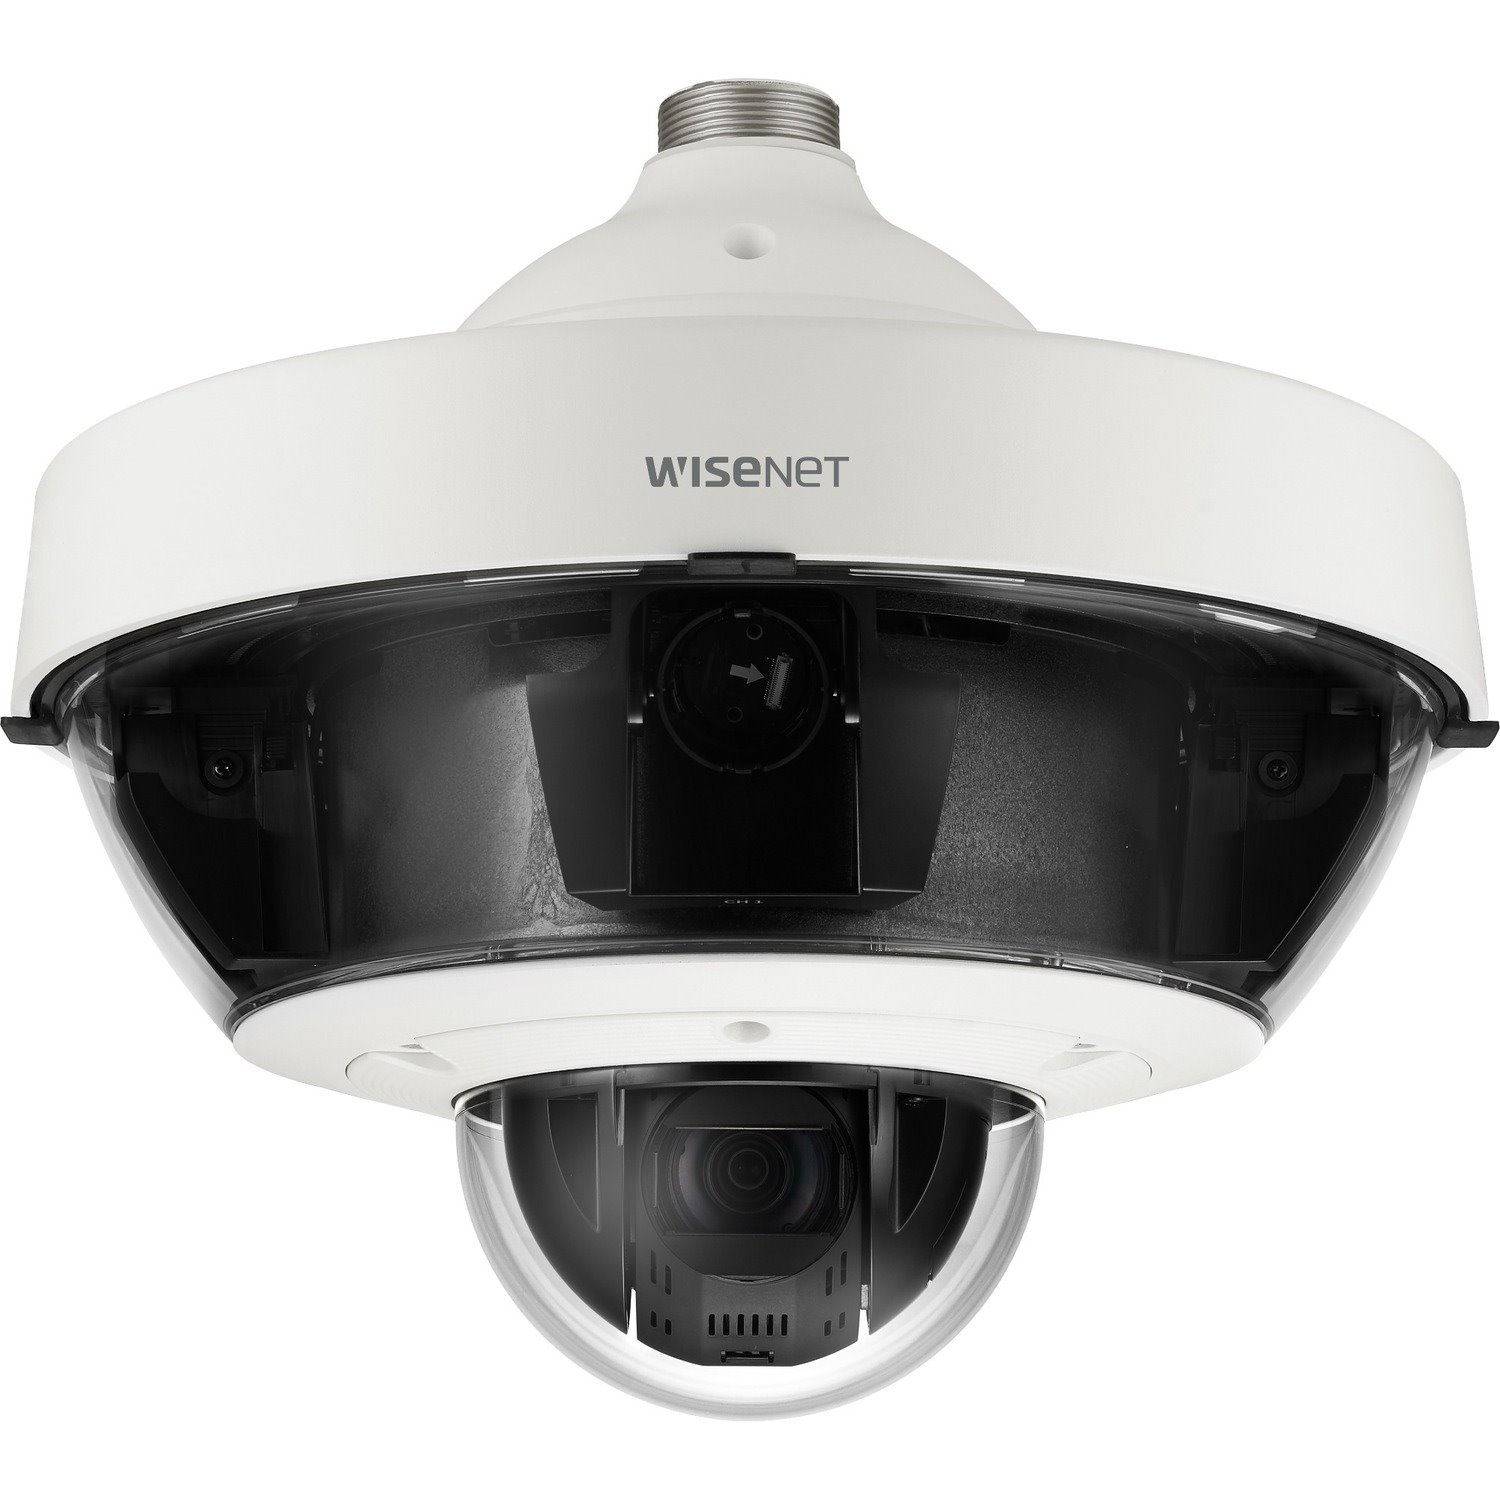 Wisenet PNM-9322VQP 2 Megapixel Outdoor Full HD Network Camera - Color - Dome - White